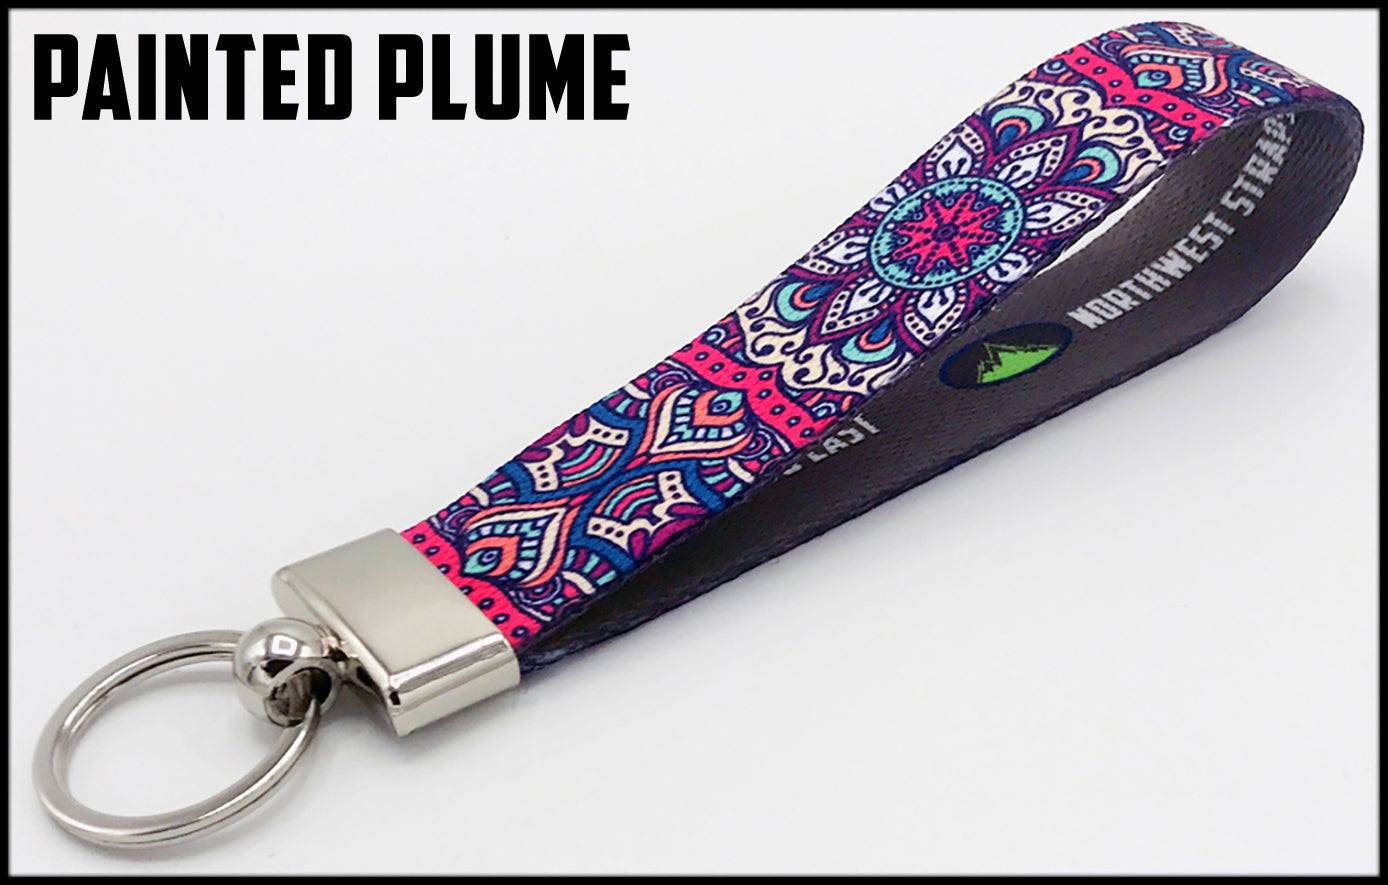 Painted plume native art. 1 inch custom picture quality polyester webbing keyfob. Design by Northwest Straps.